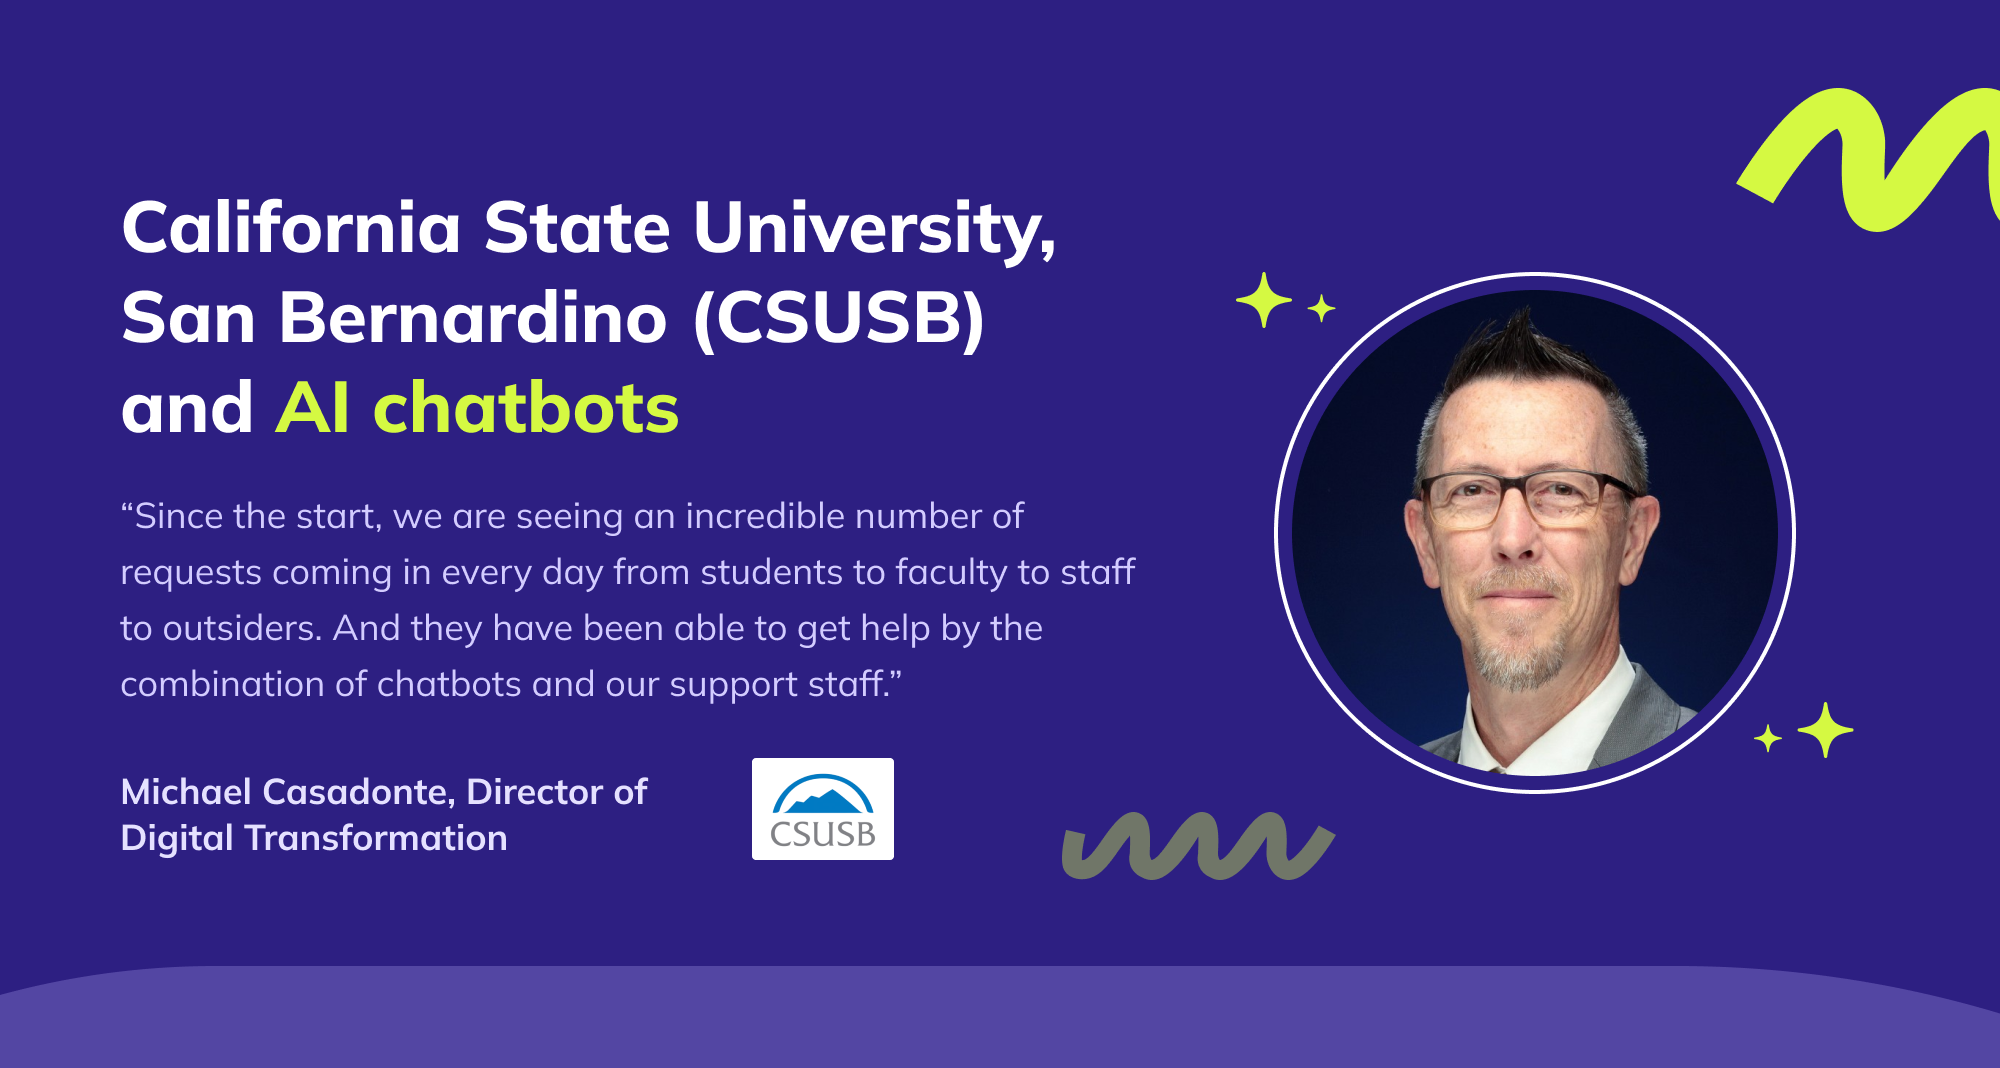 Promotional graphic for California State University, San Bernardino (CSUSB) discussing AI chatbots. It features a quote from Michael Casadonte, Director of Digital Transformation, praising the effectiveness of chatbots in assisting students, faculty, staff, and outsiders. The image has a purple background with white and neon green text, and includes a circular portrait of Casadonte.